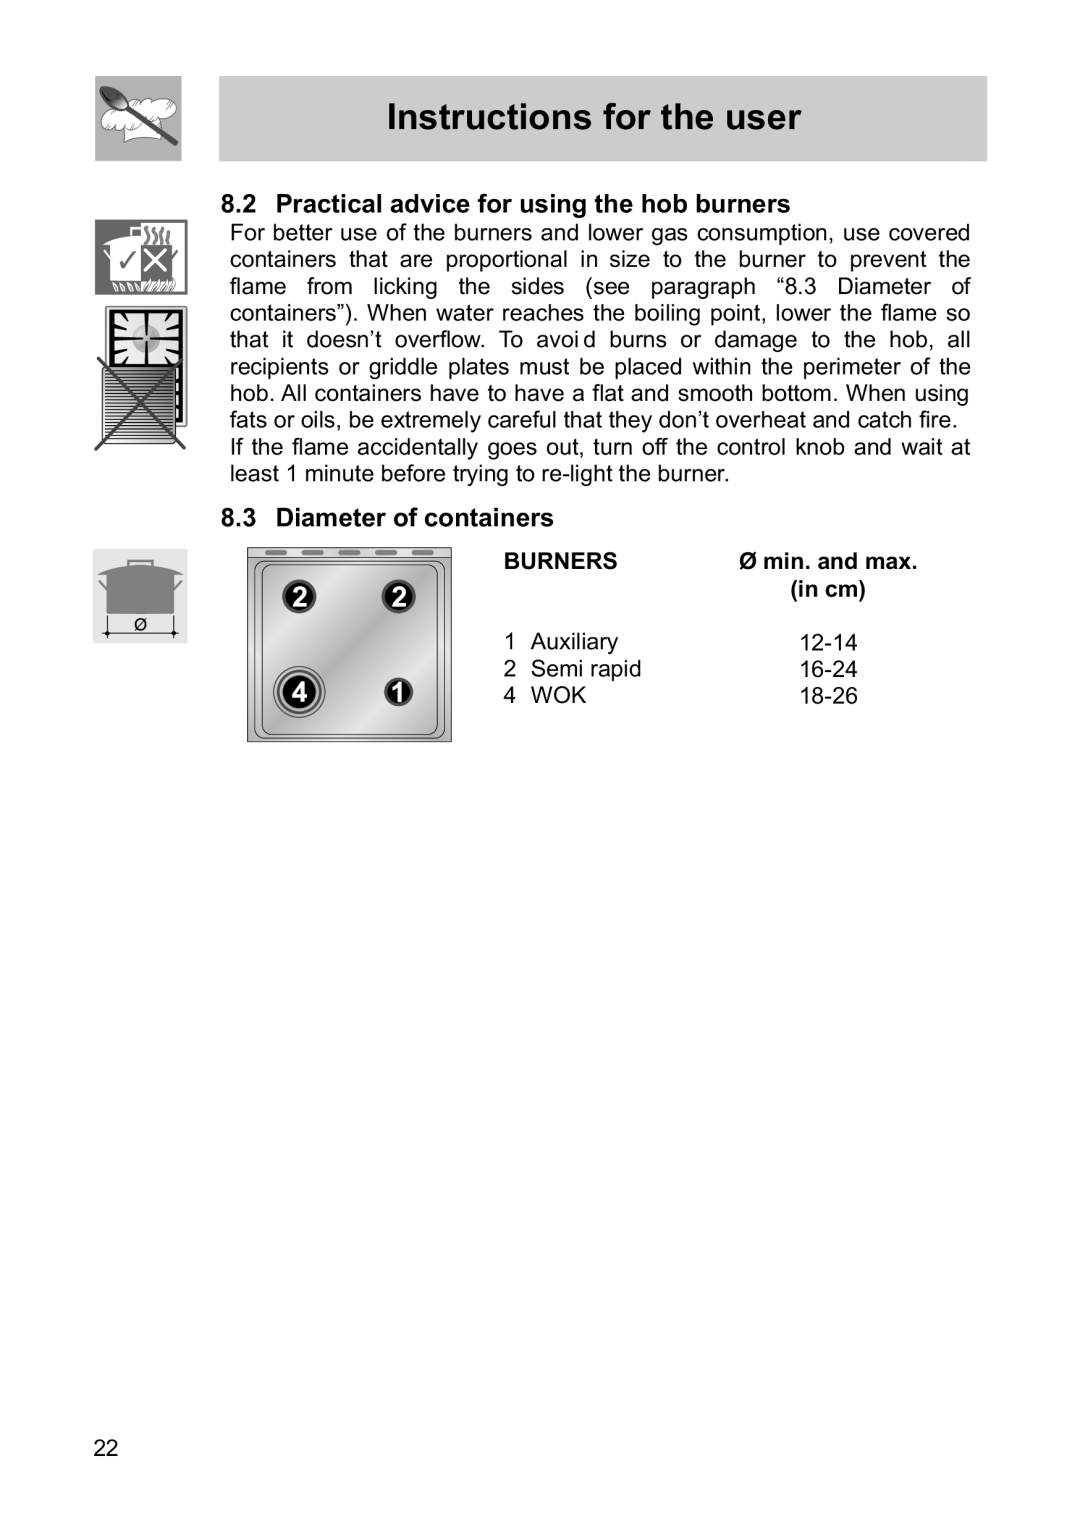 Smeg FS61MFXLP Practical advice for using the hob burners, Diameter of containers, Instructions for the user, Burners 